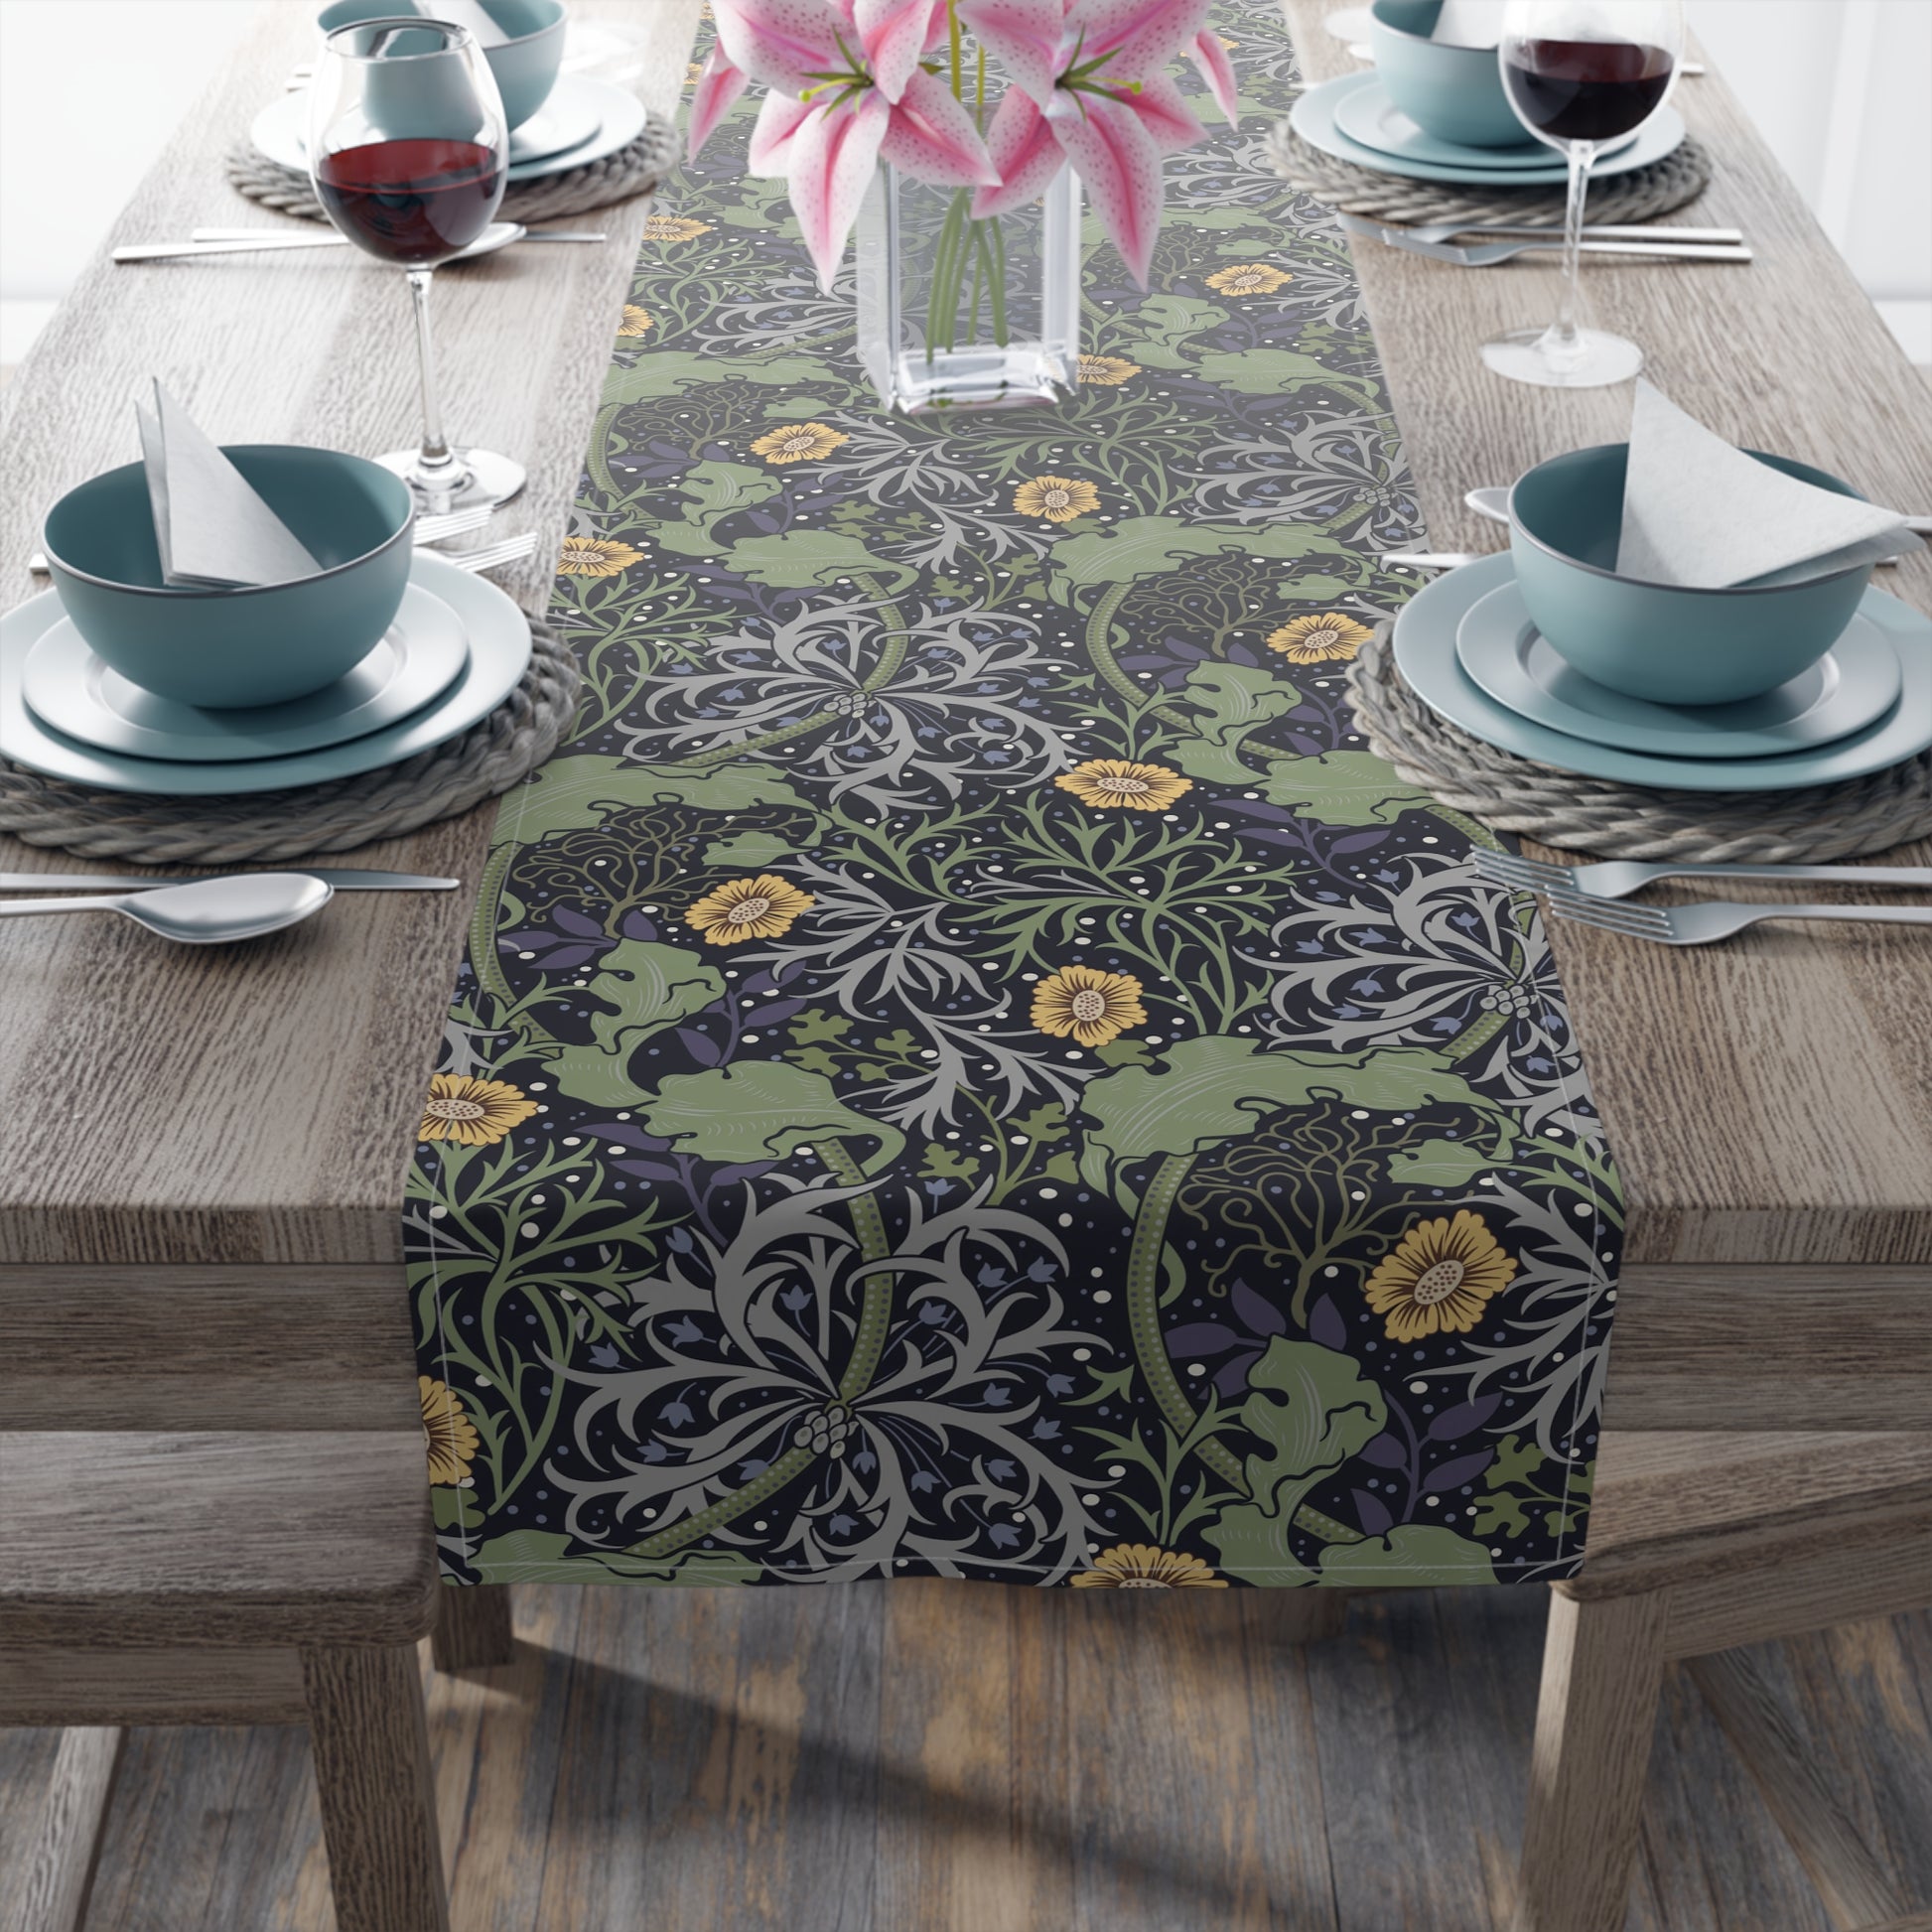 william-morris-co-table-runner-seaweed-collection-yellow-flower-3